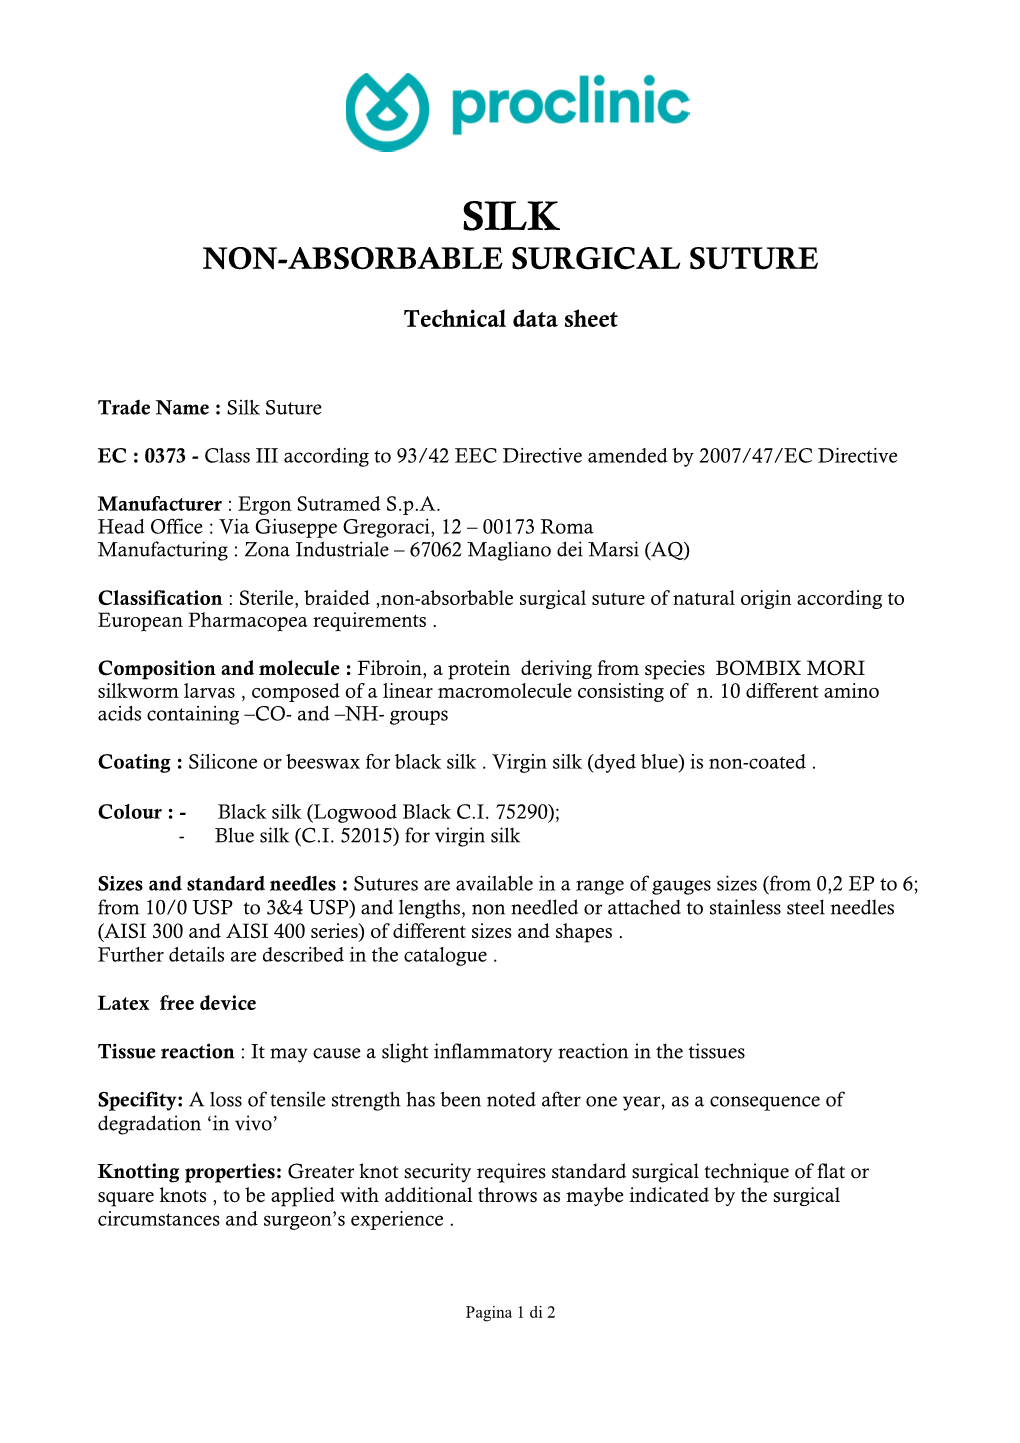 Non-Absorbable Surgical Suture